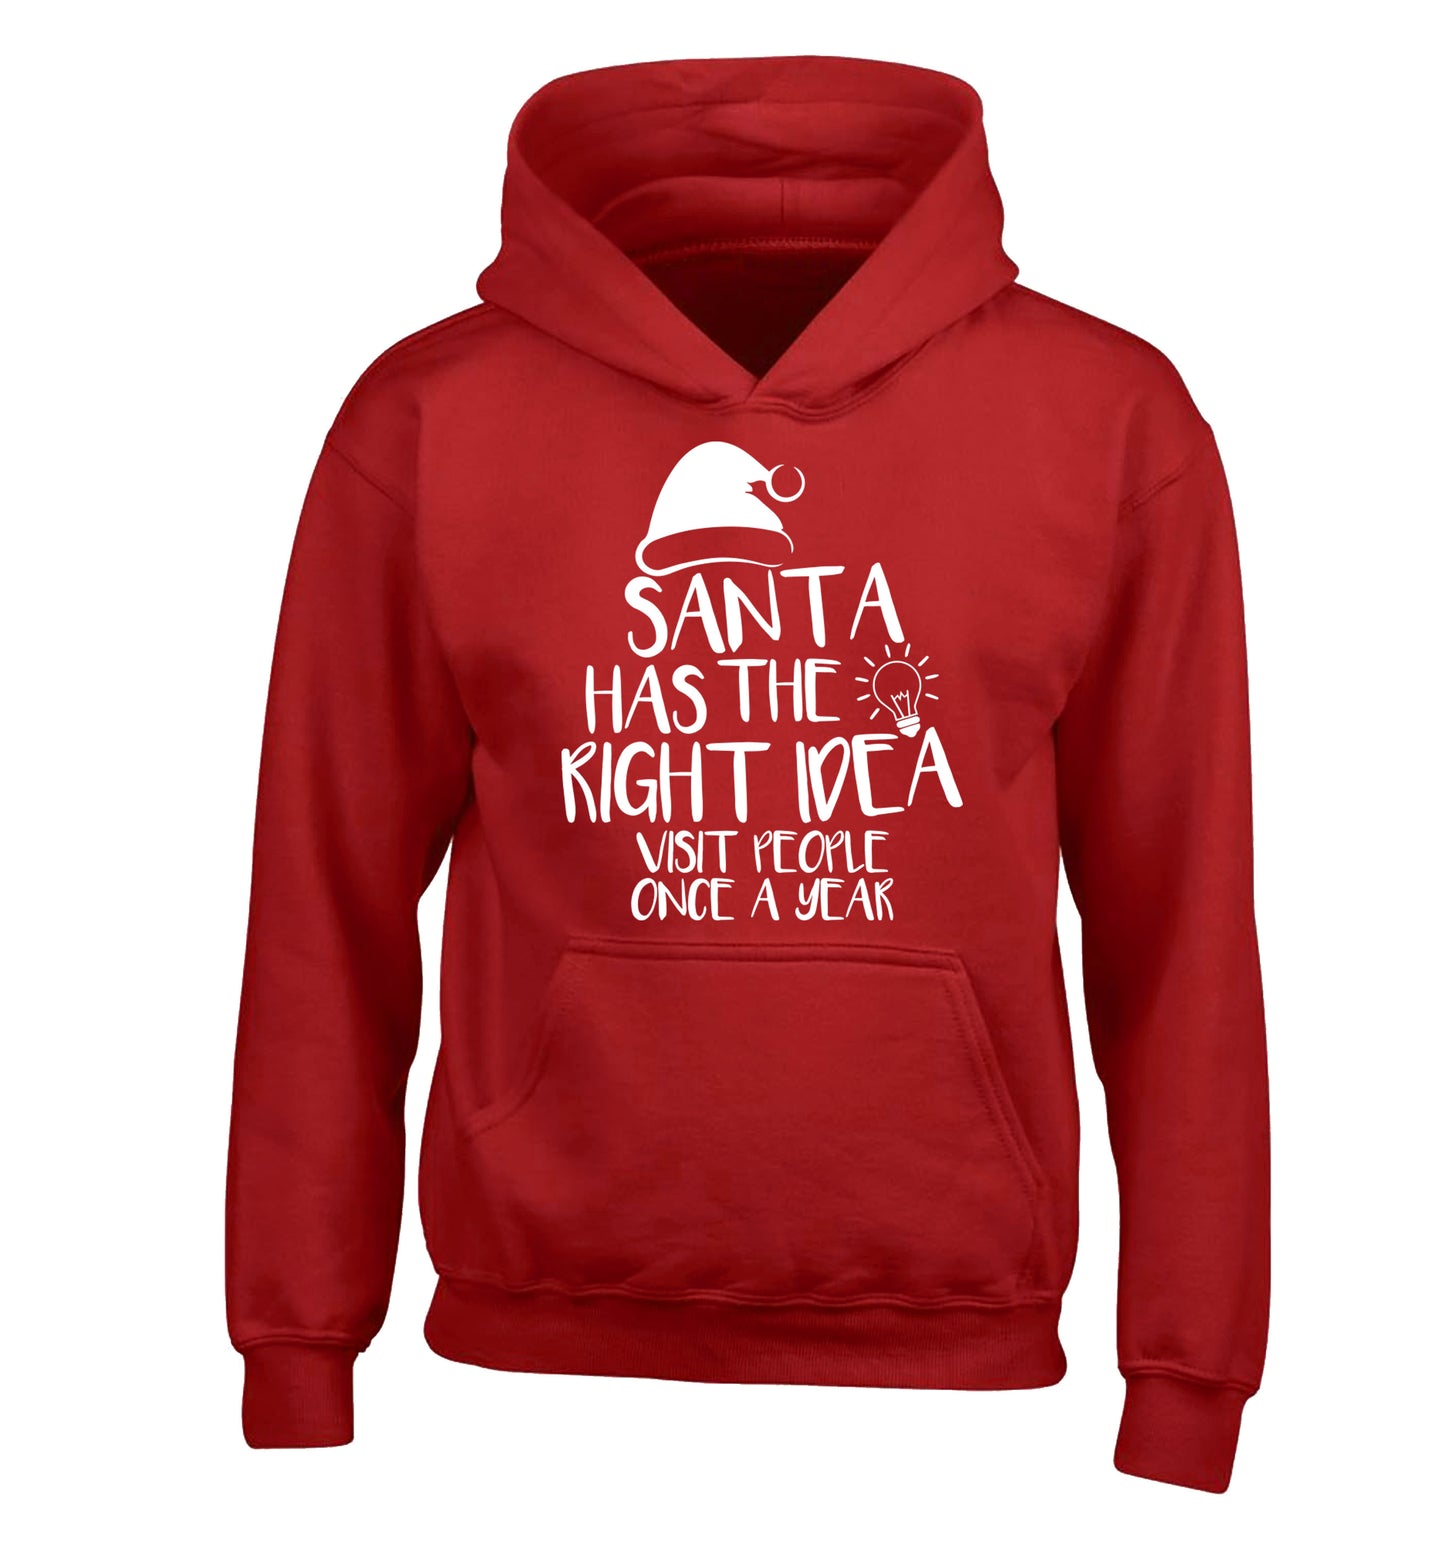 Santa has the right idea visit people once a year children's red hoodie 12-14 Years